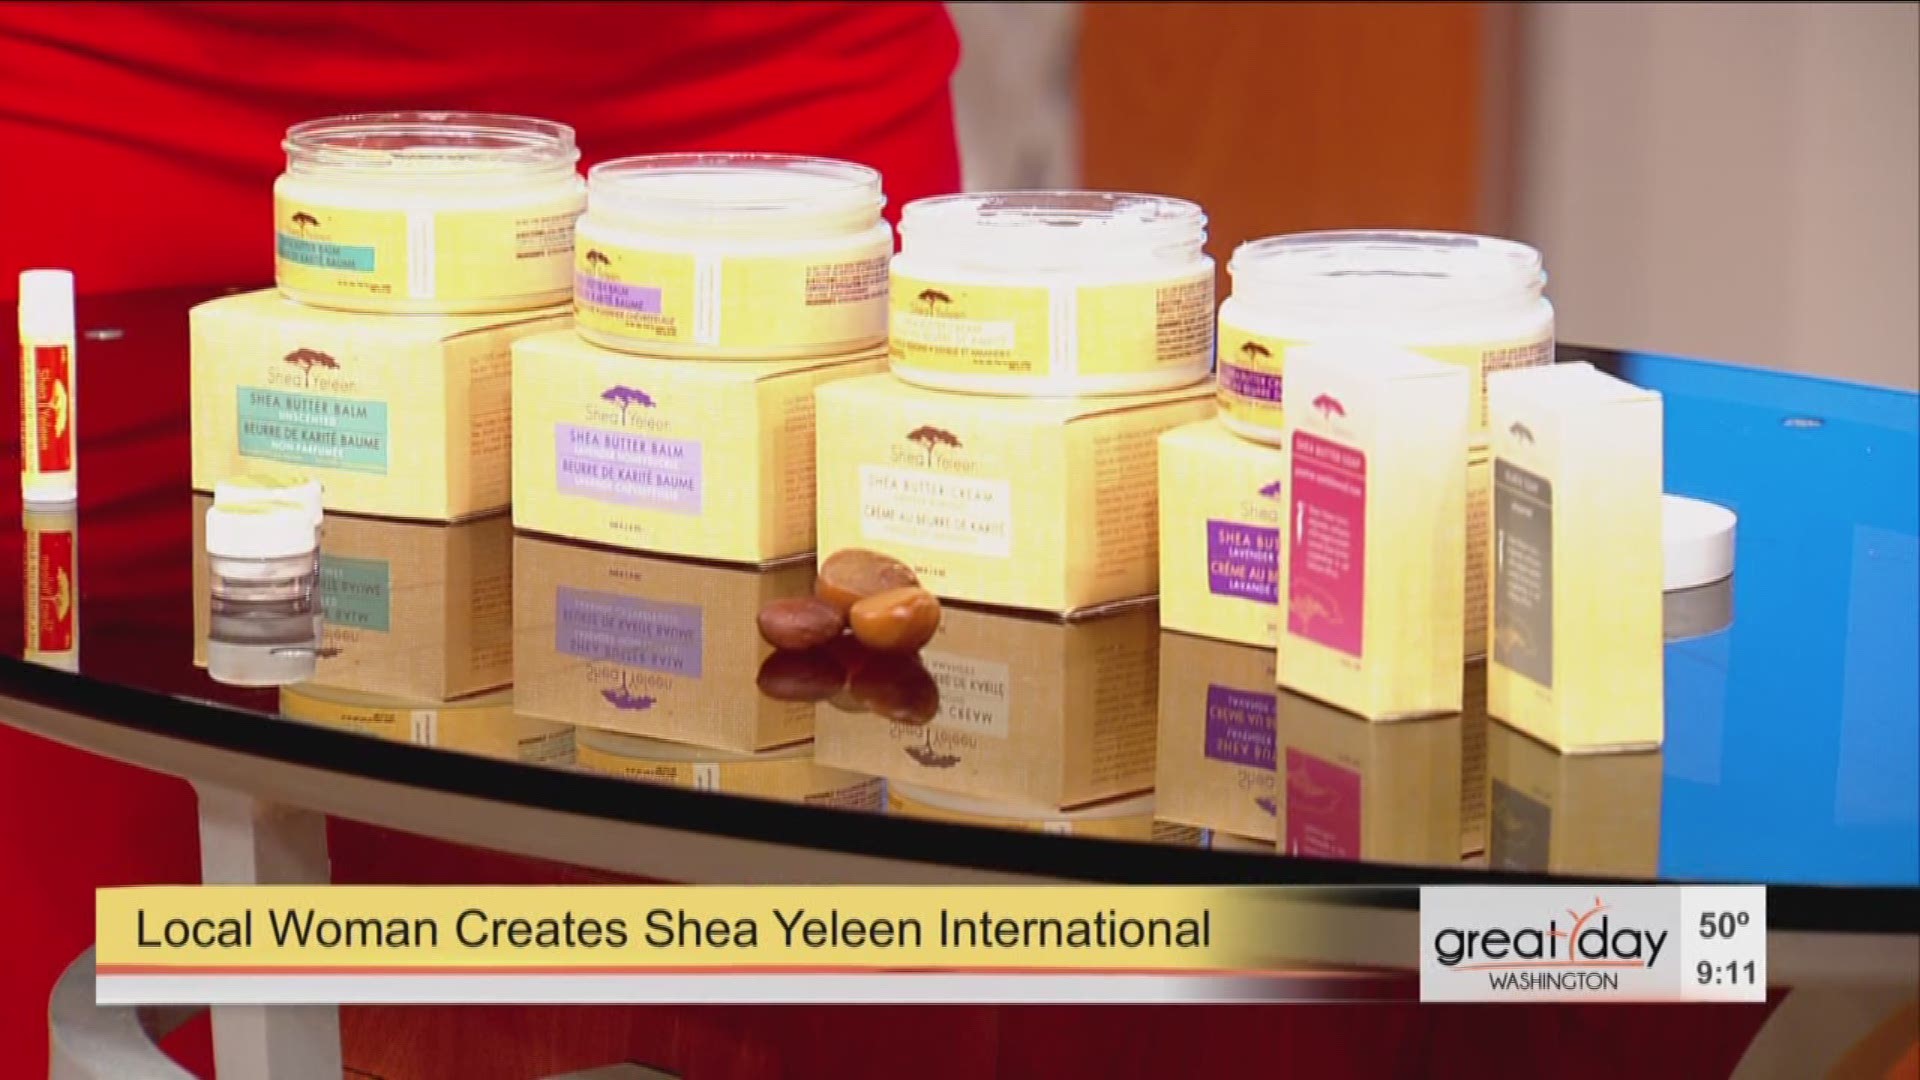 Chris Leary speaks to Rahama Wright, a local entrepreneur whose Shea Butter products are currently being sold at Whole Foods and supply a safe working environment for women in West Africa.